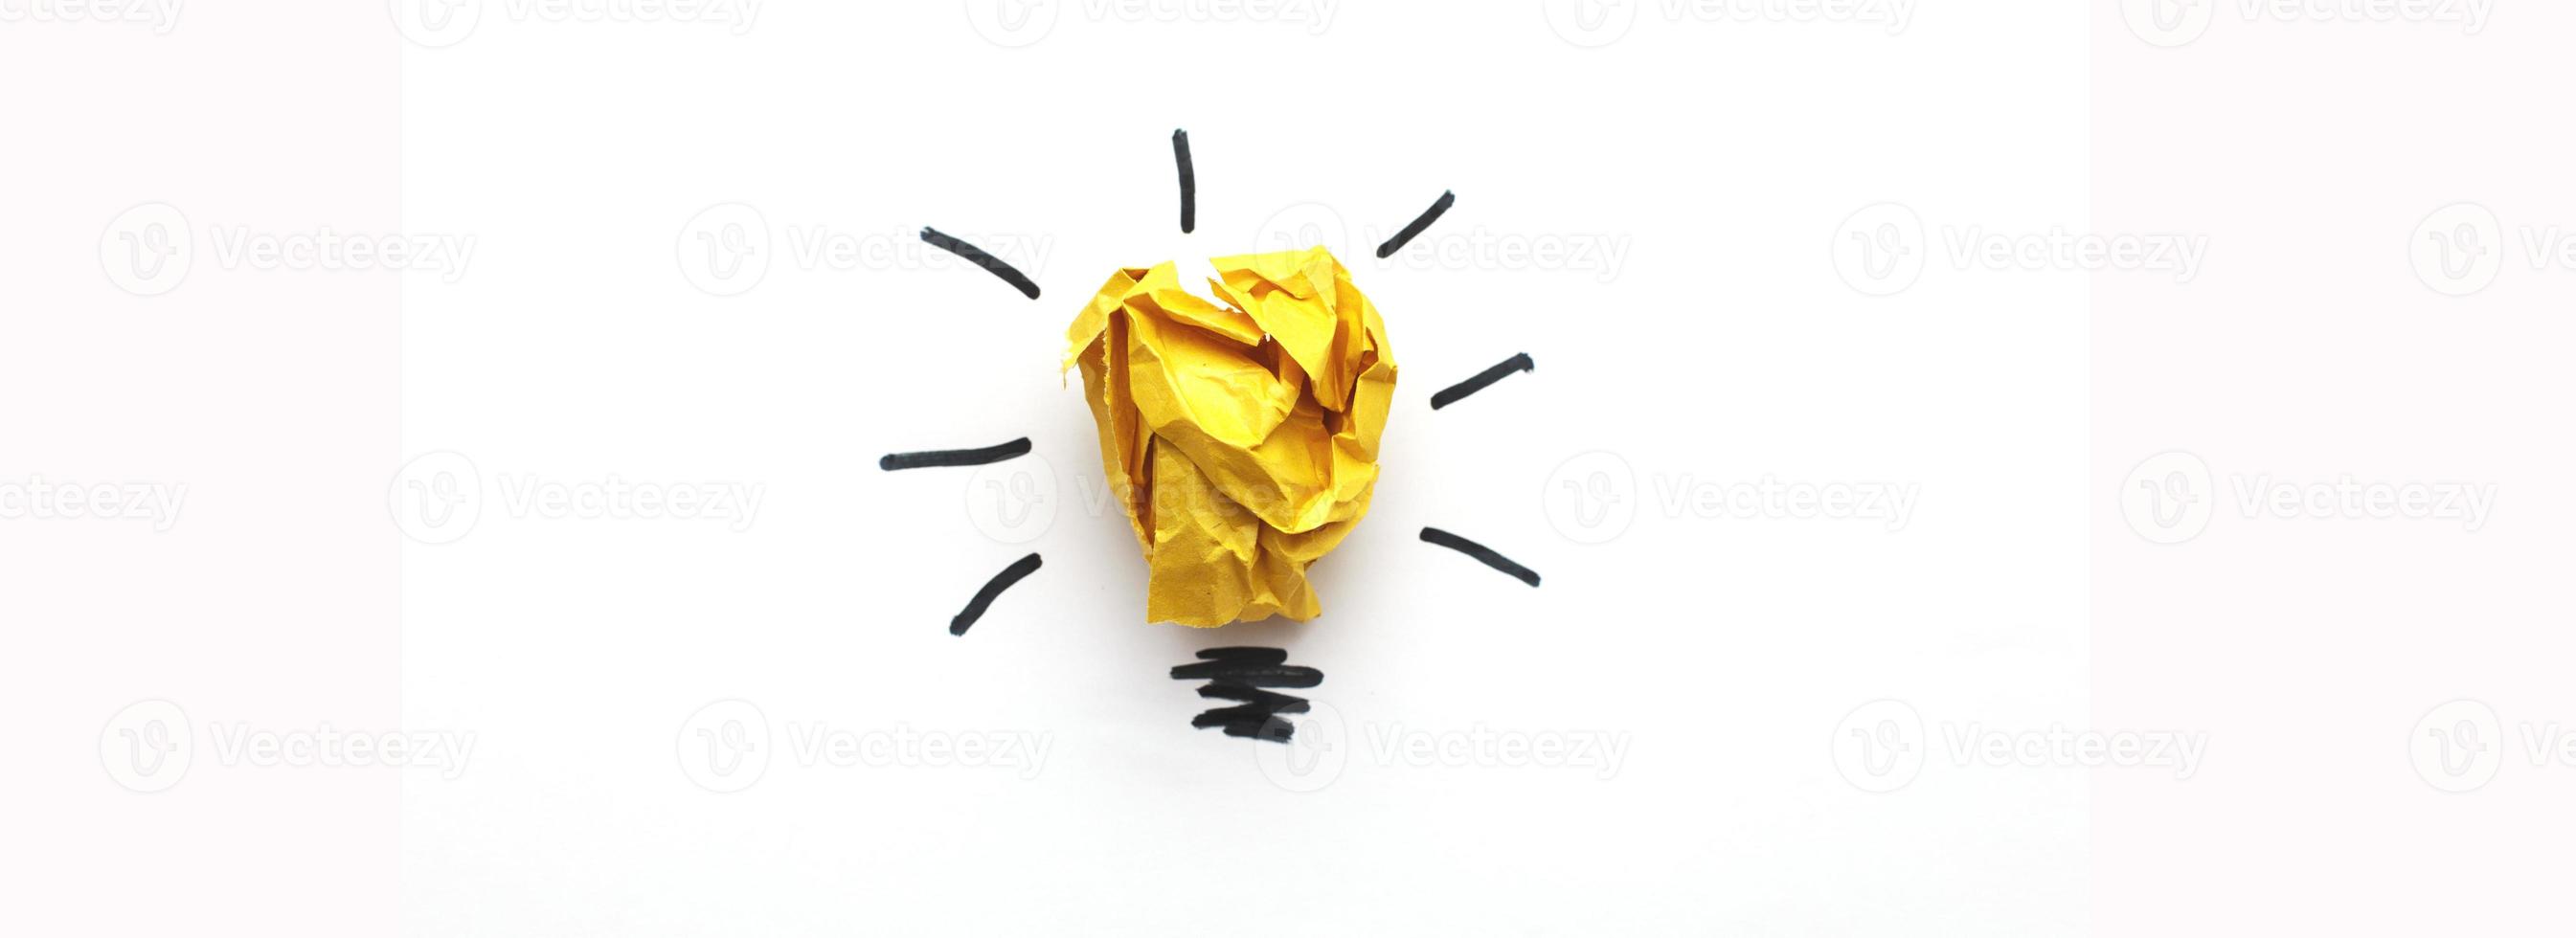 crumpled yelllow paper laightbulb as a concept creative idea and innovation. banner photo